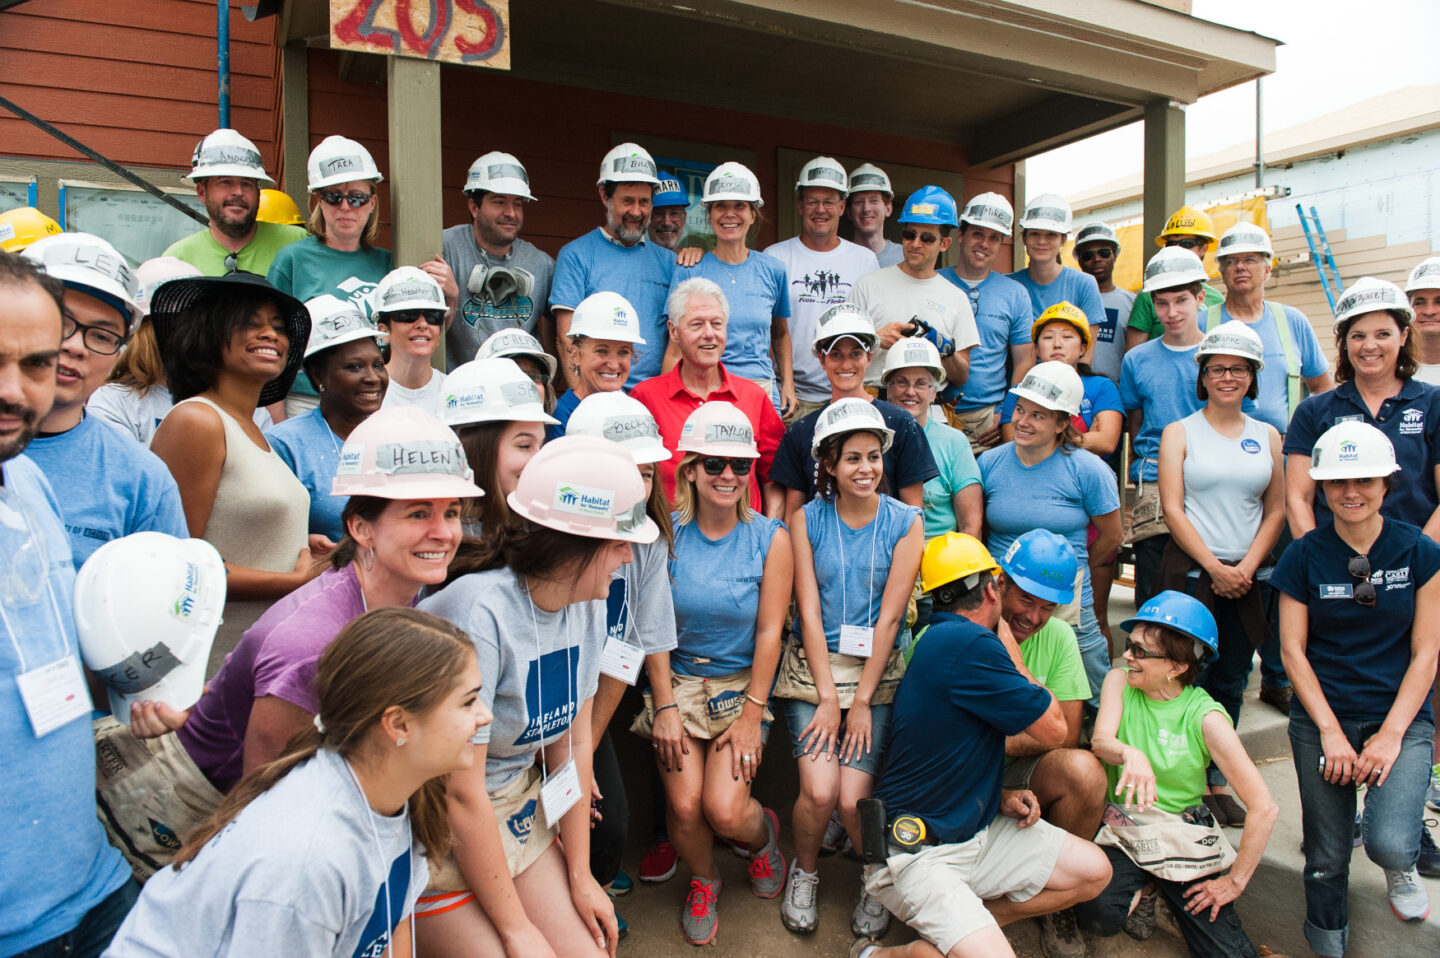 President Clinton with a large group of volunteers wearing hard hats